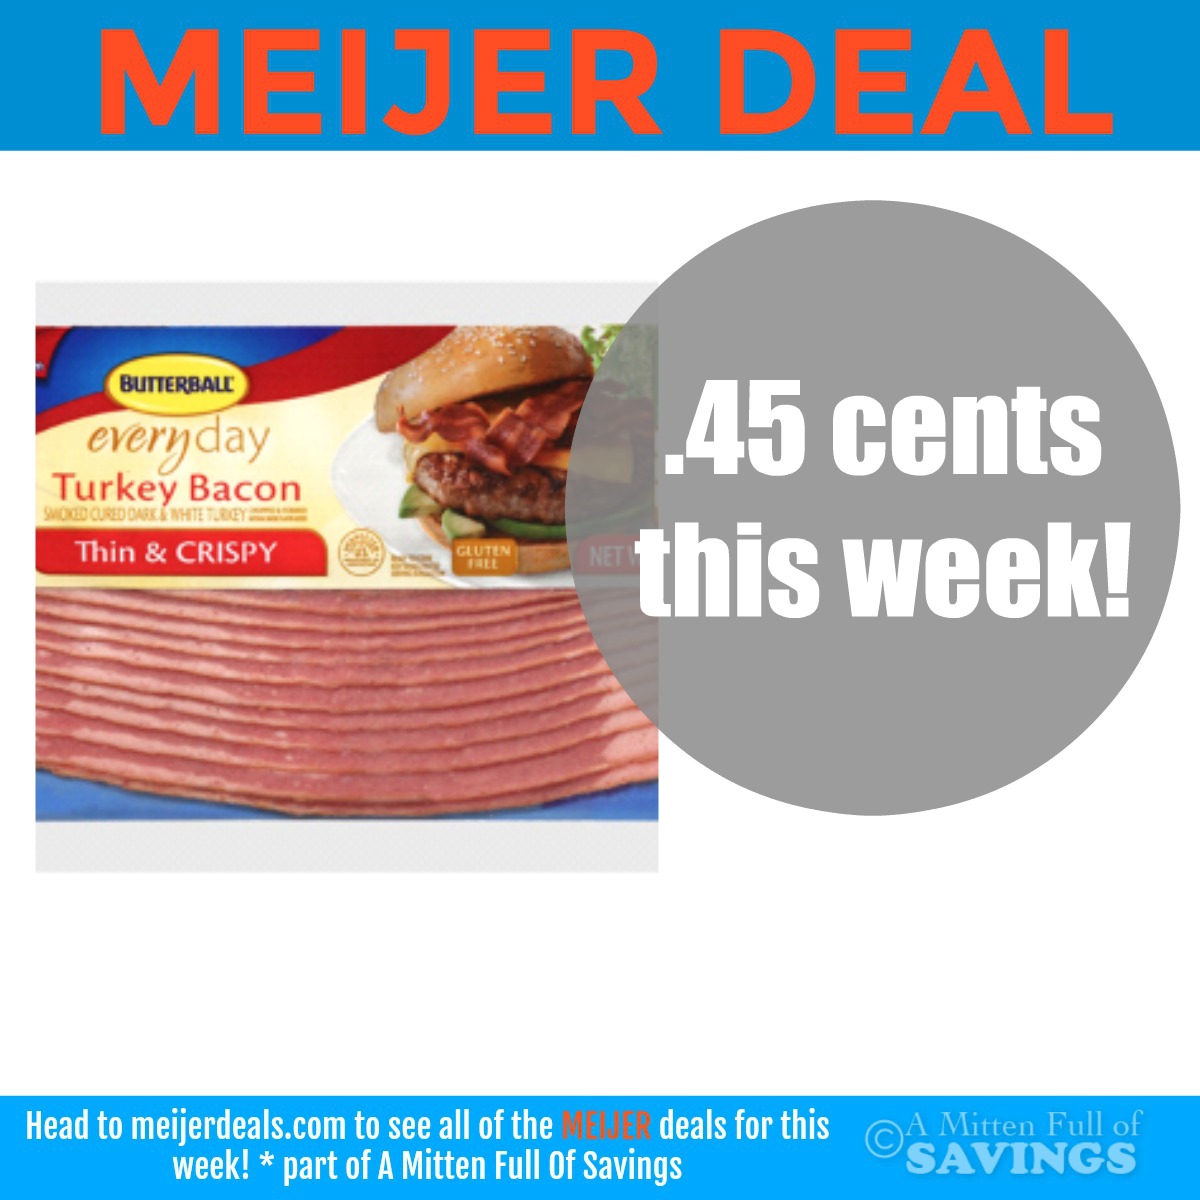 Butterball Turkey Bacon Deal .45 cents at Meijer this week!